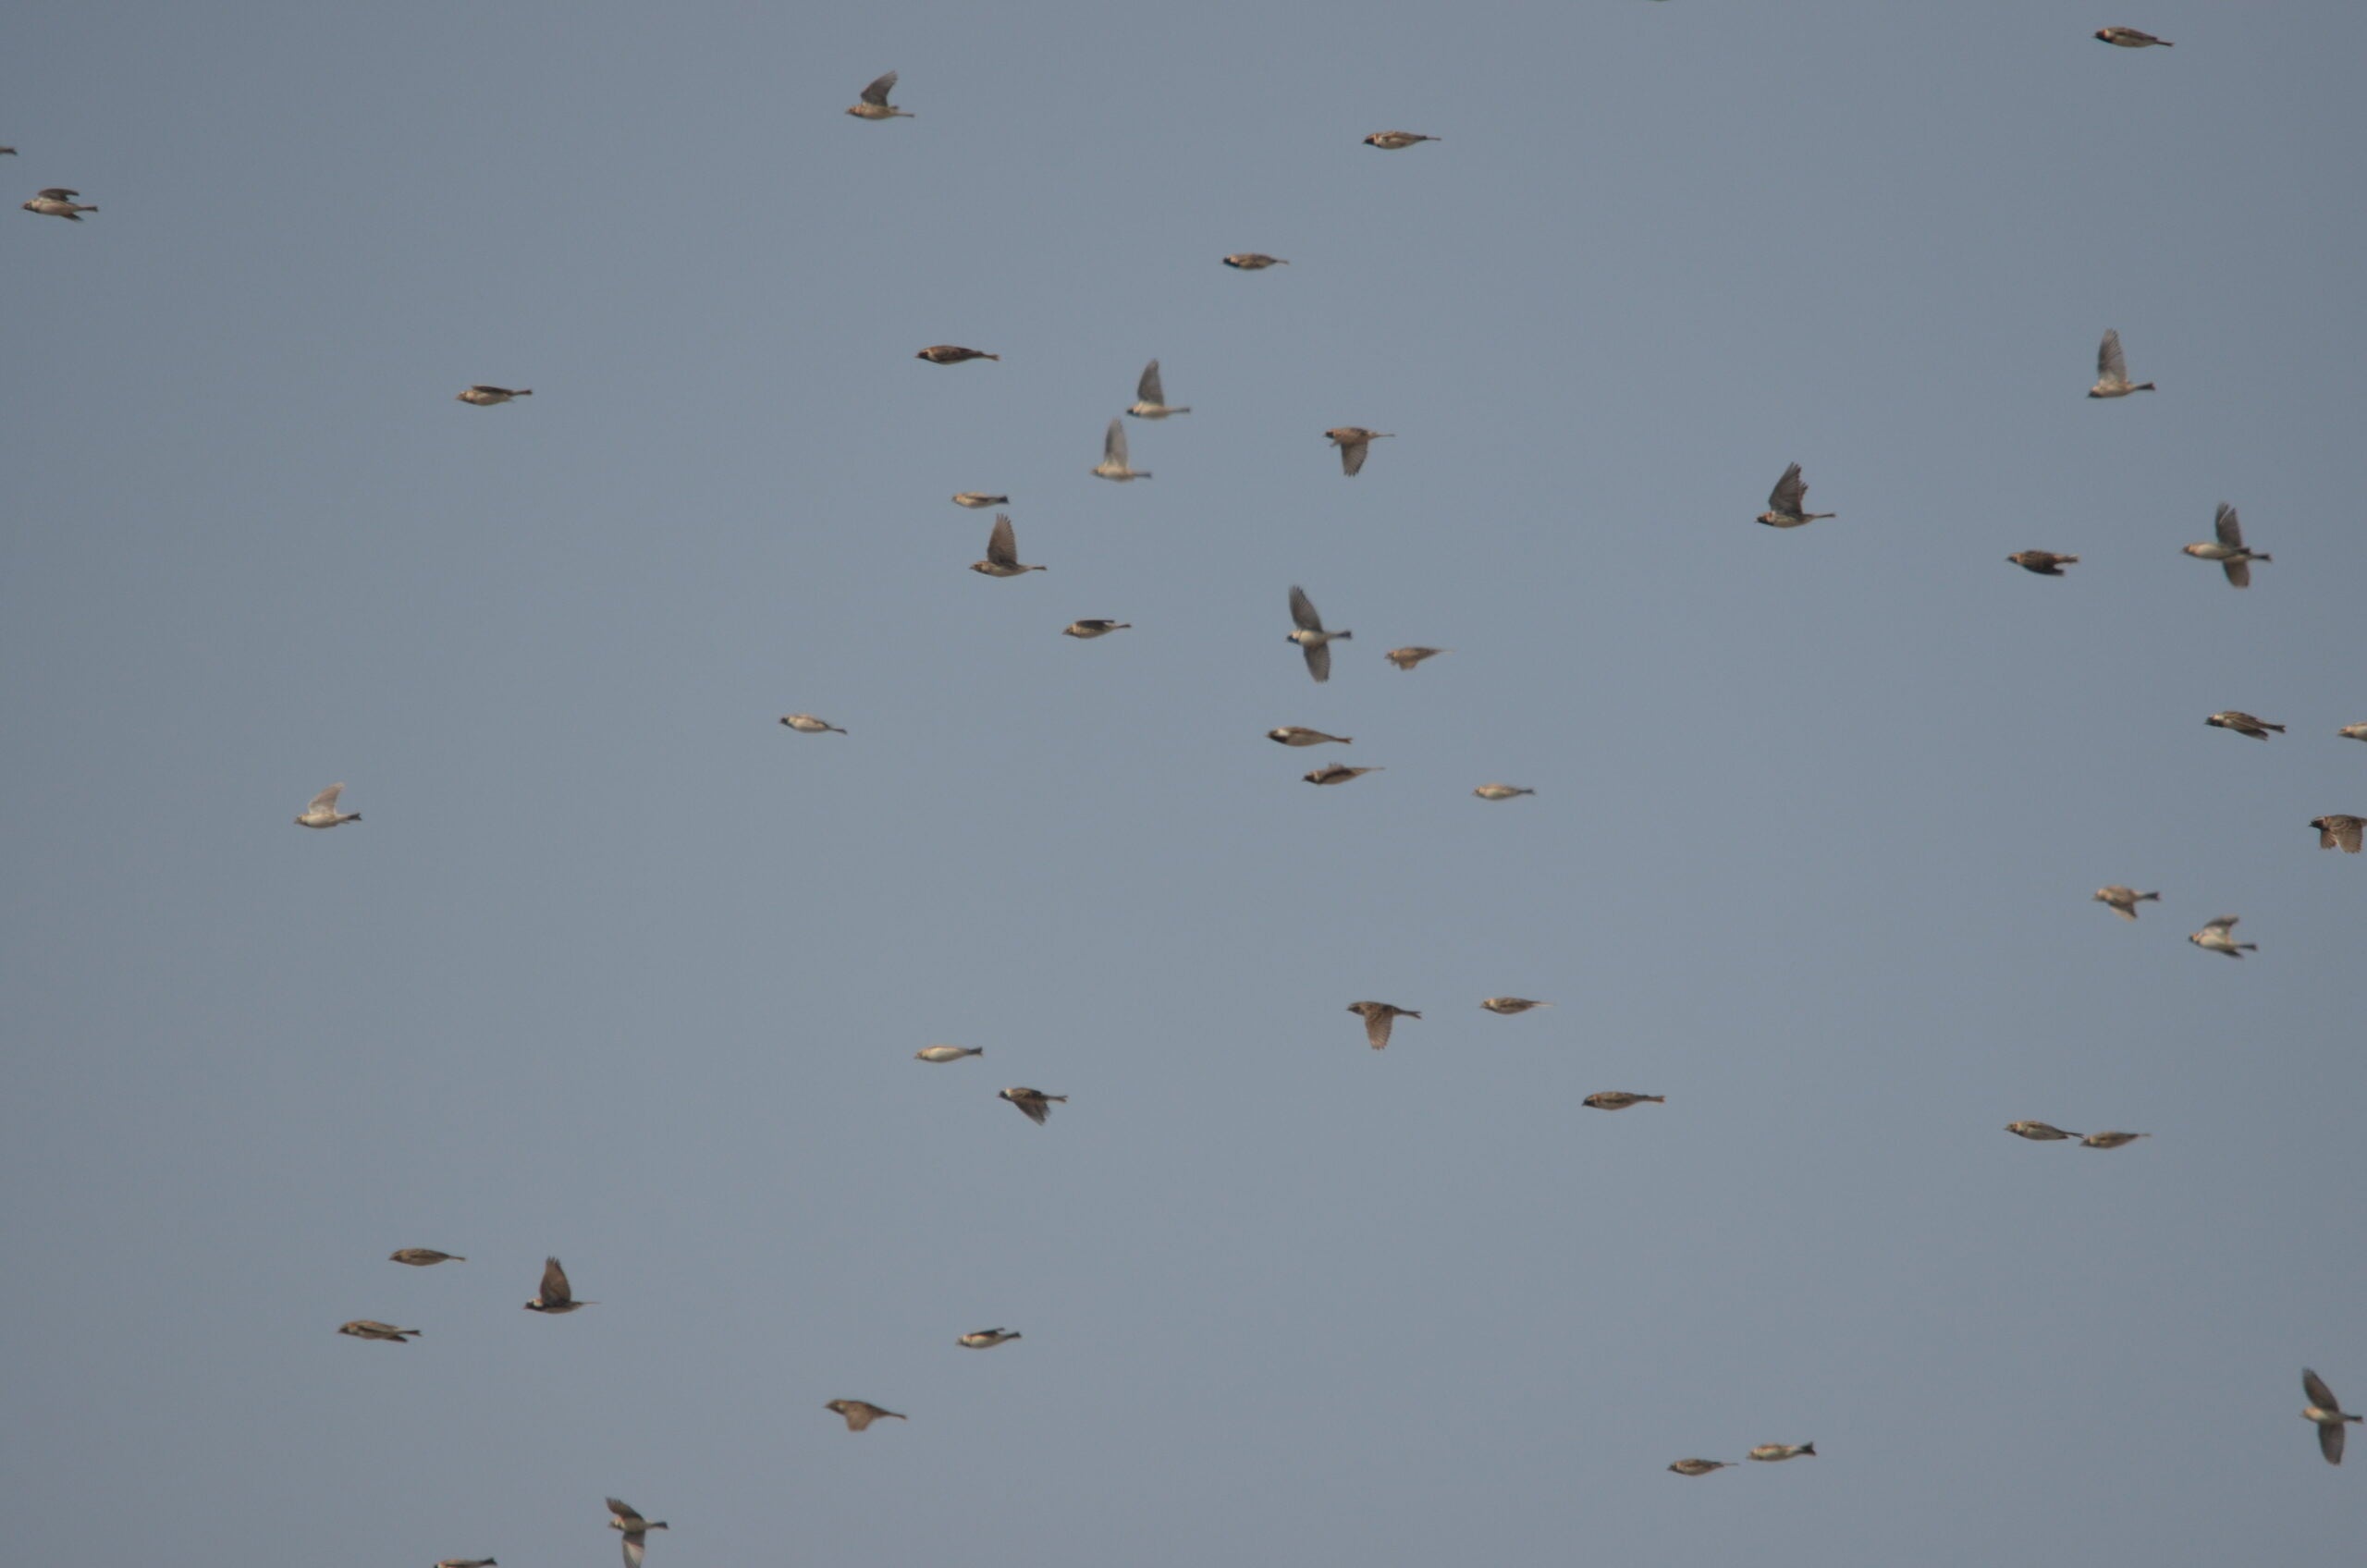 about 50 small brownish songbirds in flight against a blue sky